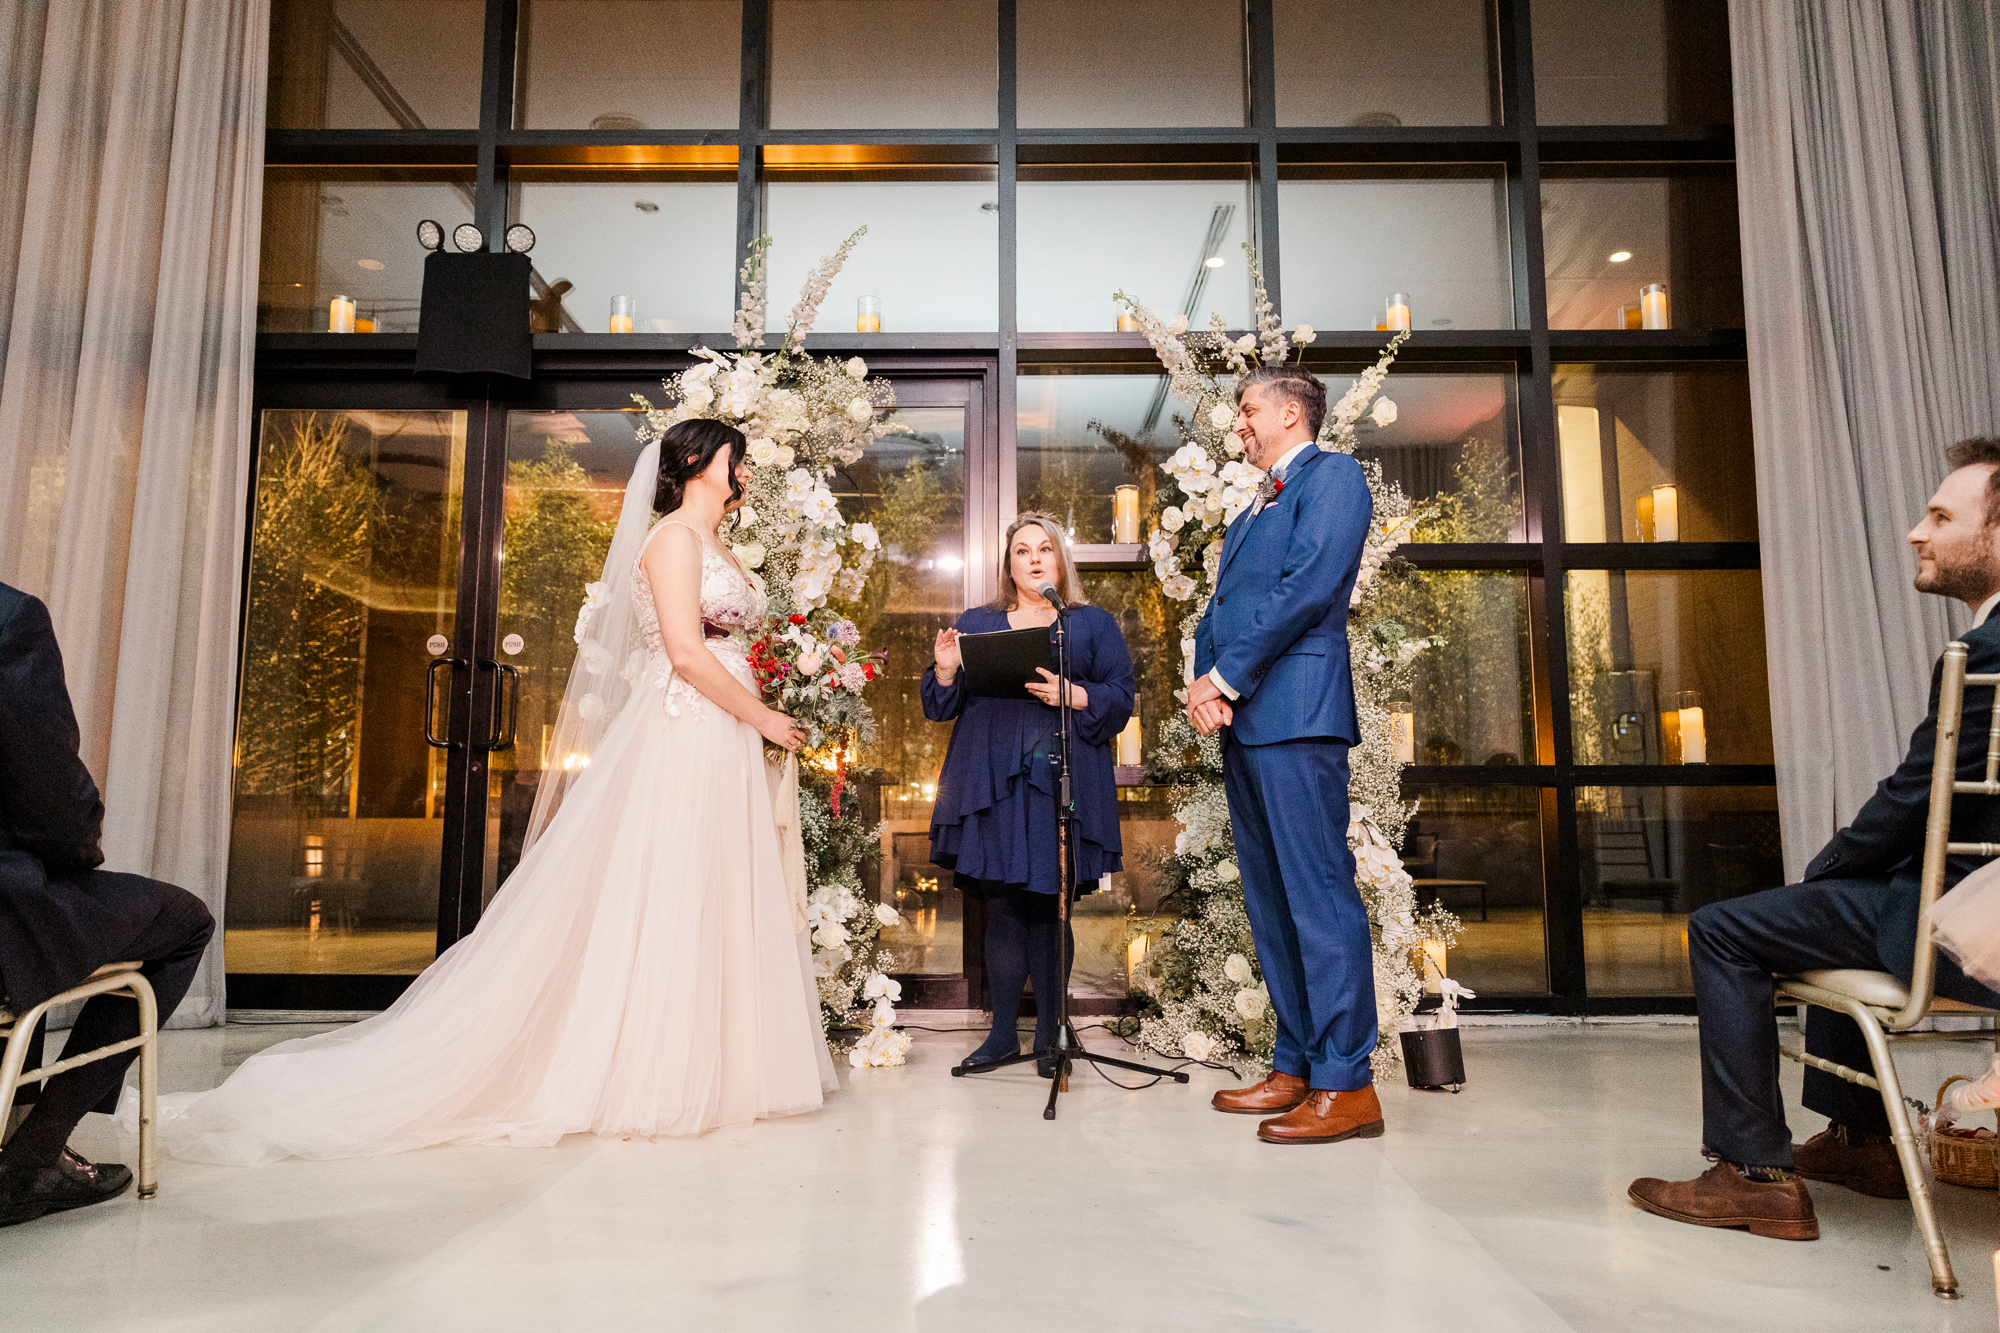 Magical Wedding Ceremony at the Ravel Hotel, NYC